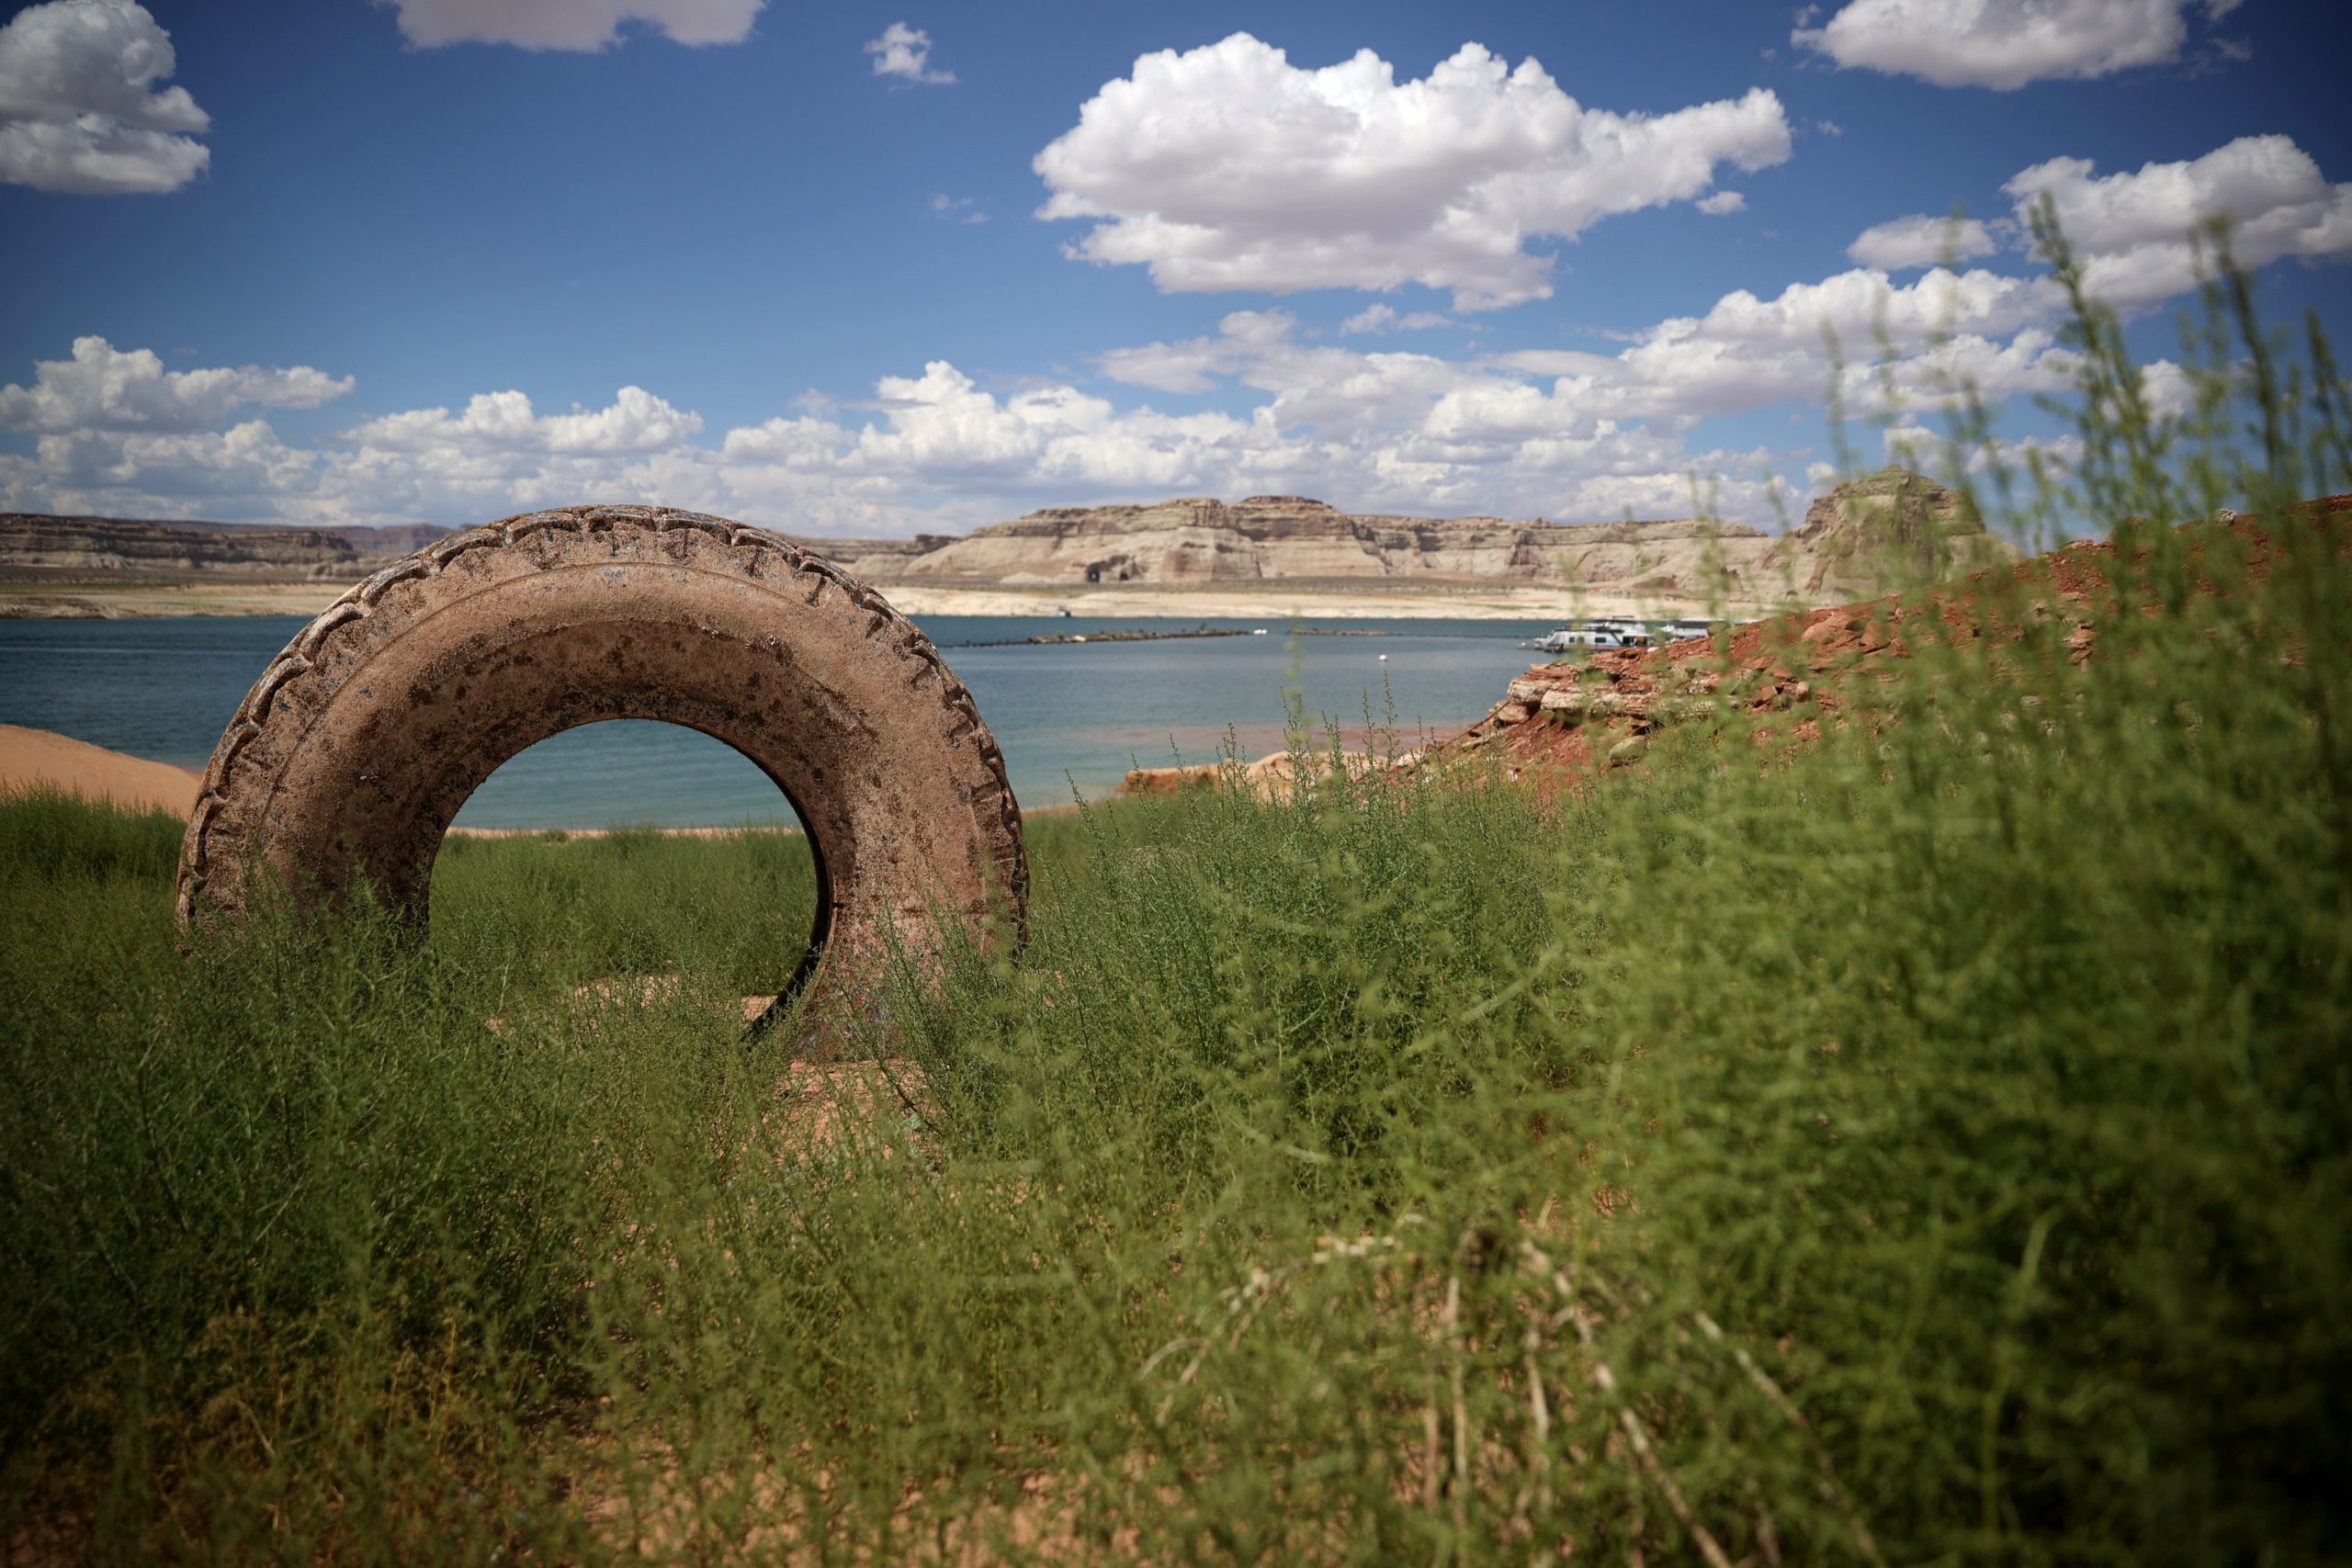  A tire sits on dry land in a section of Lake Powell that used to be underwater on June 24, 2021 in Lake Powell, Utah. (Photo: Justin Sullivan, Getty Images)